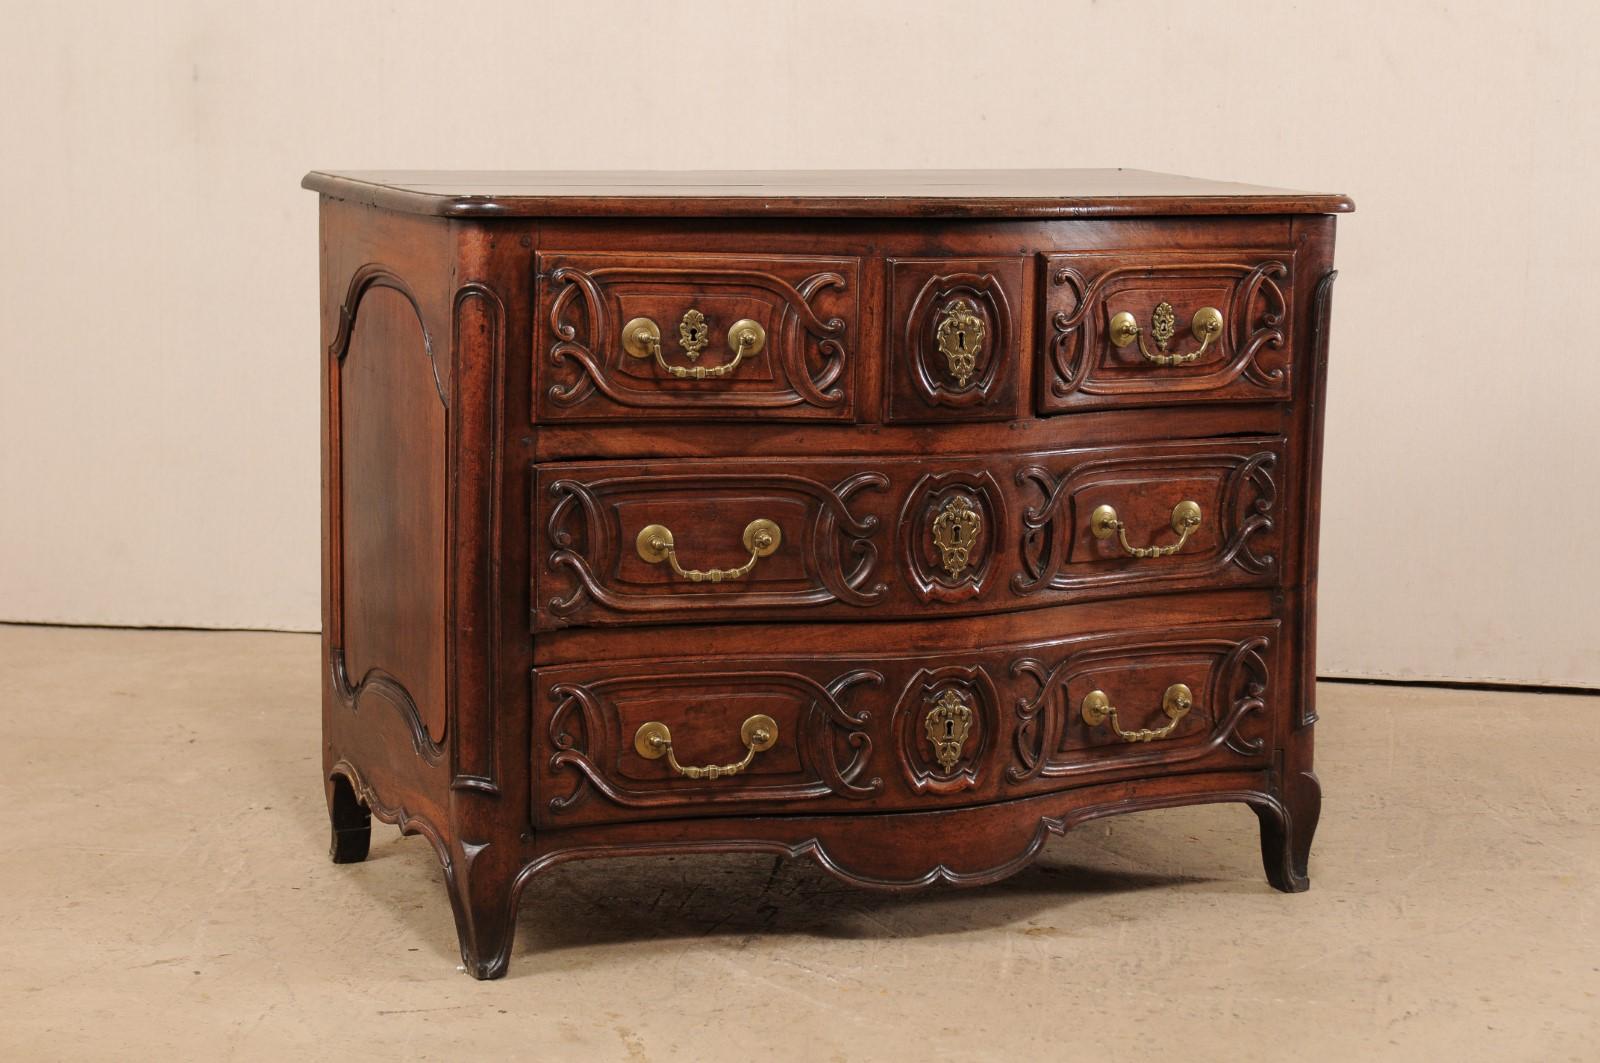 An elegant French Louis XV serpentine commode from the 18th century. This antique chest from France with curvy top and bowed front, features three drawers across the top facade, with two full-sized drawers beneath. The sides have fluidly-carved